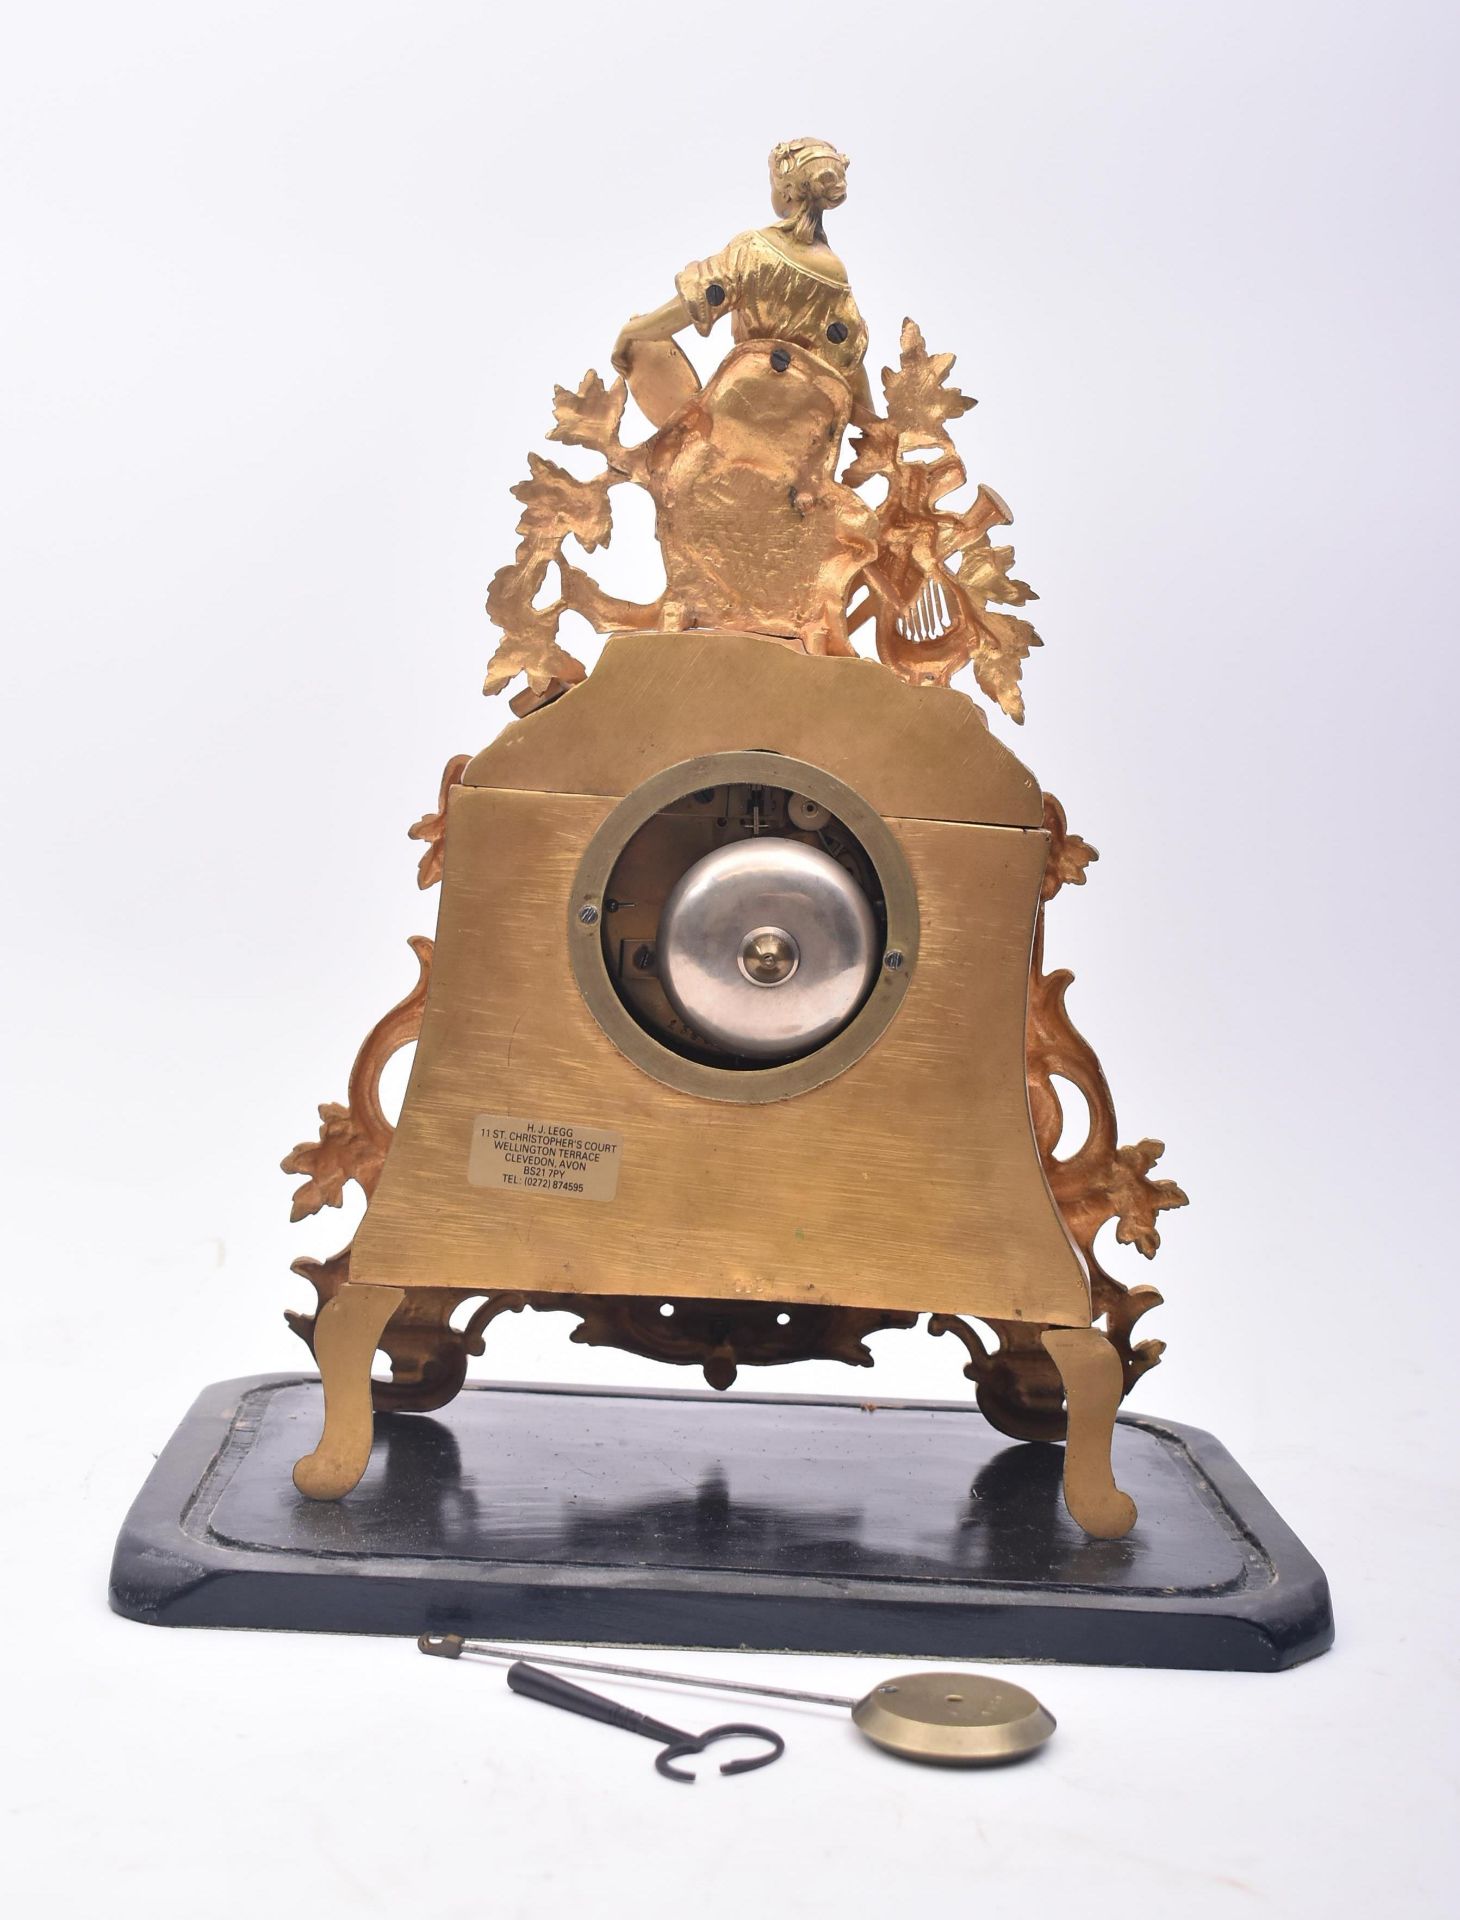 19TH CENTURY FRENCH VINCENTI & CIE DOME MANTEL CLOCK - Image 5 of 8